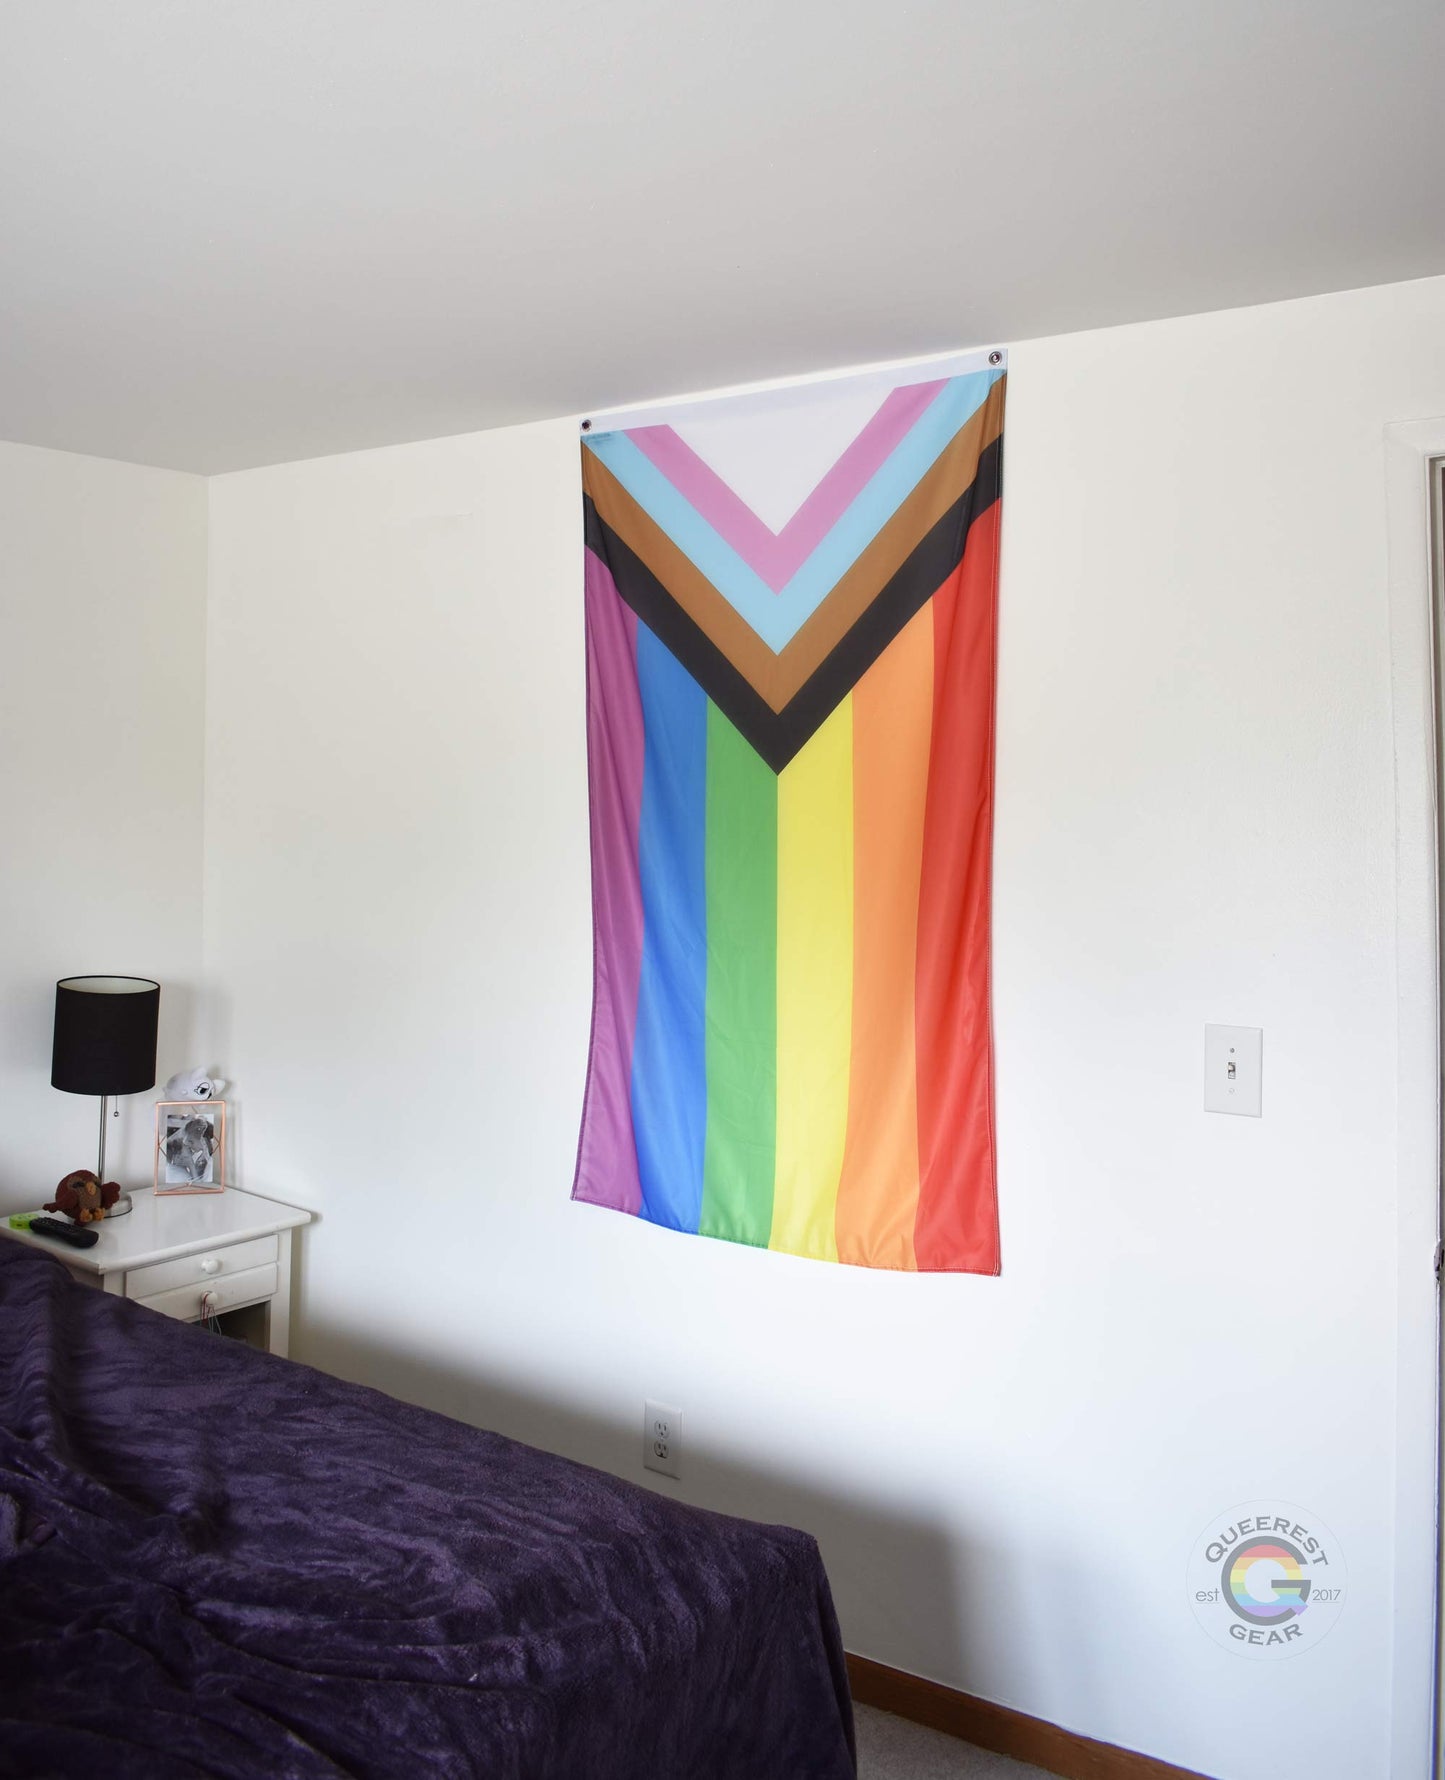  3’x5’ progress flag hanging vertically on the wall of a bedroom with a nightstand and a bed